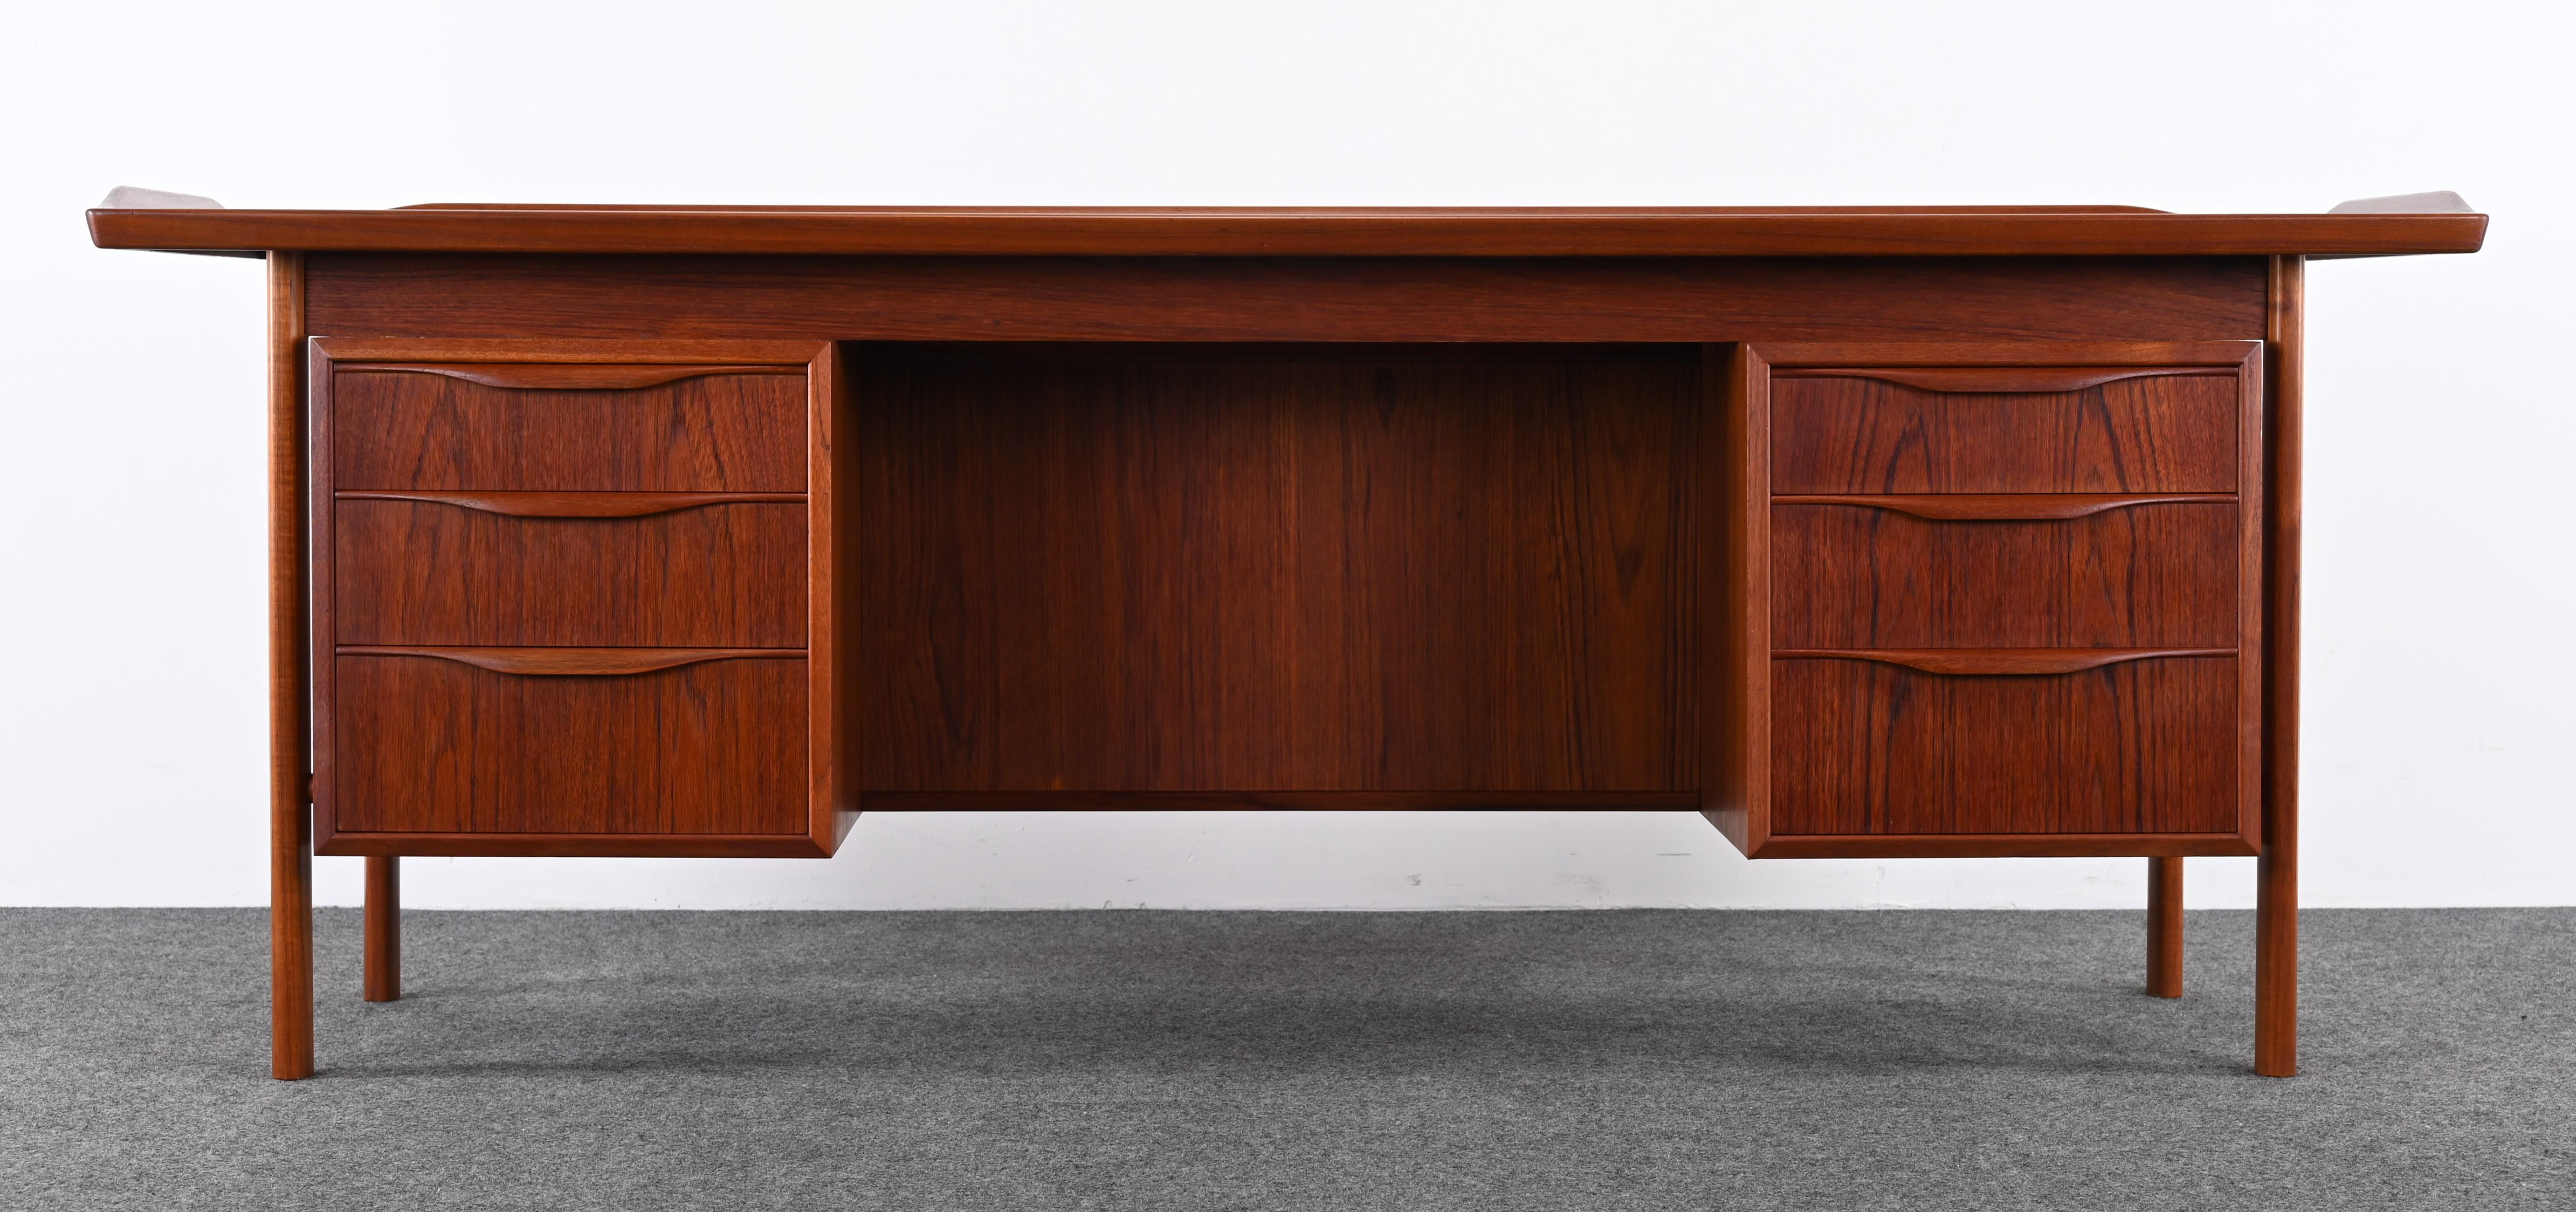 A handsome Danish Modern Executive Desk in the manner of Arne Vodder, 1960. This large Mid-Century desk has five drawers, shelves, and two drop-down doors with extra shelves for ample storage. It is difficult to find large-scale Danish Executive